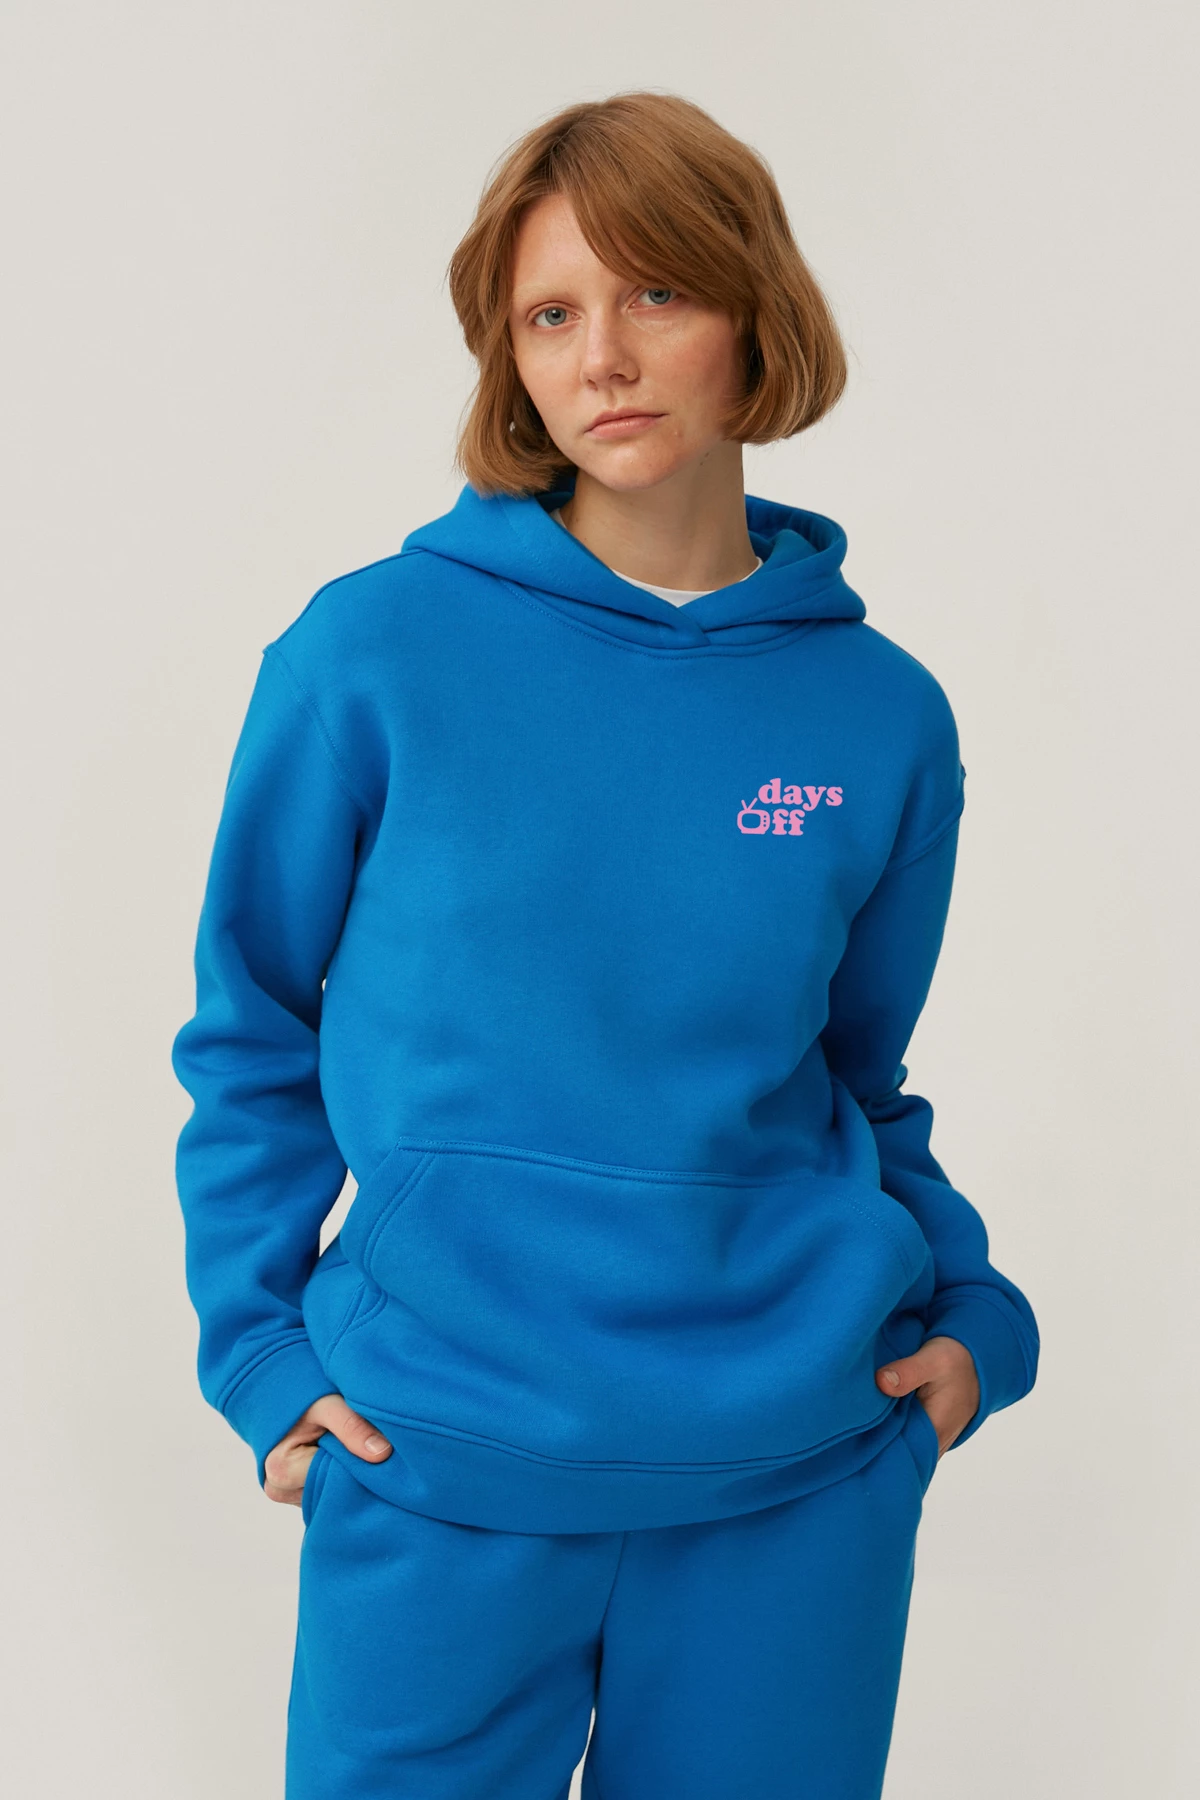 Elelctric blue jersey hoodie "Days off" with fleece, photo 1